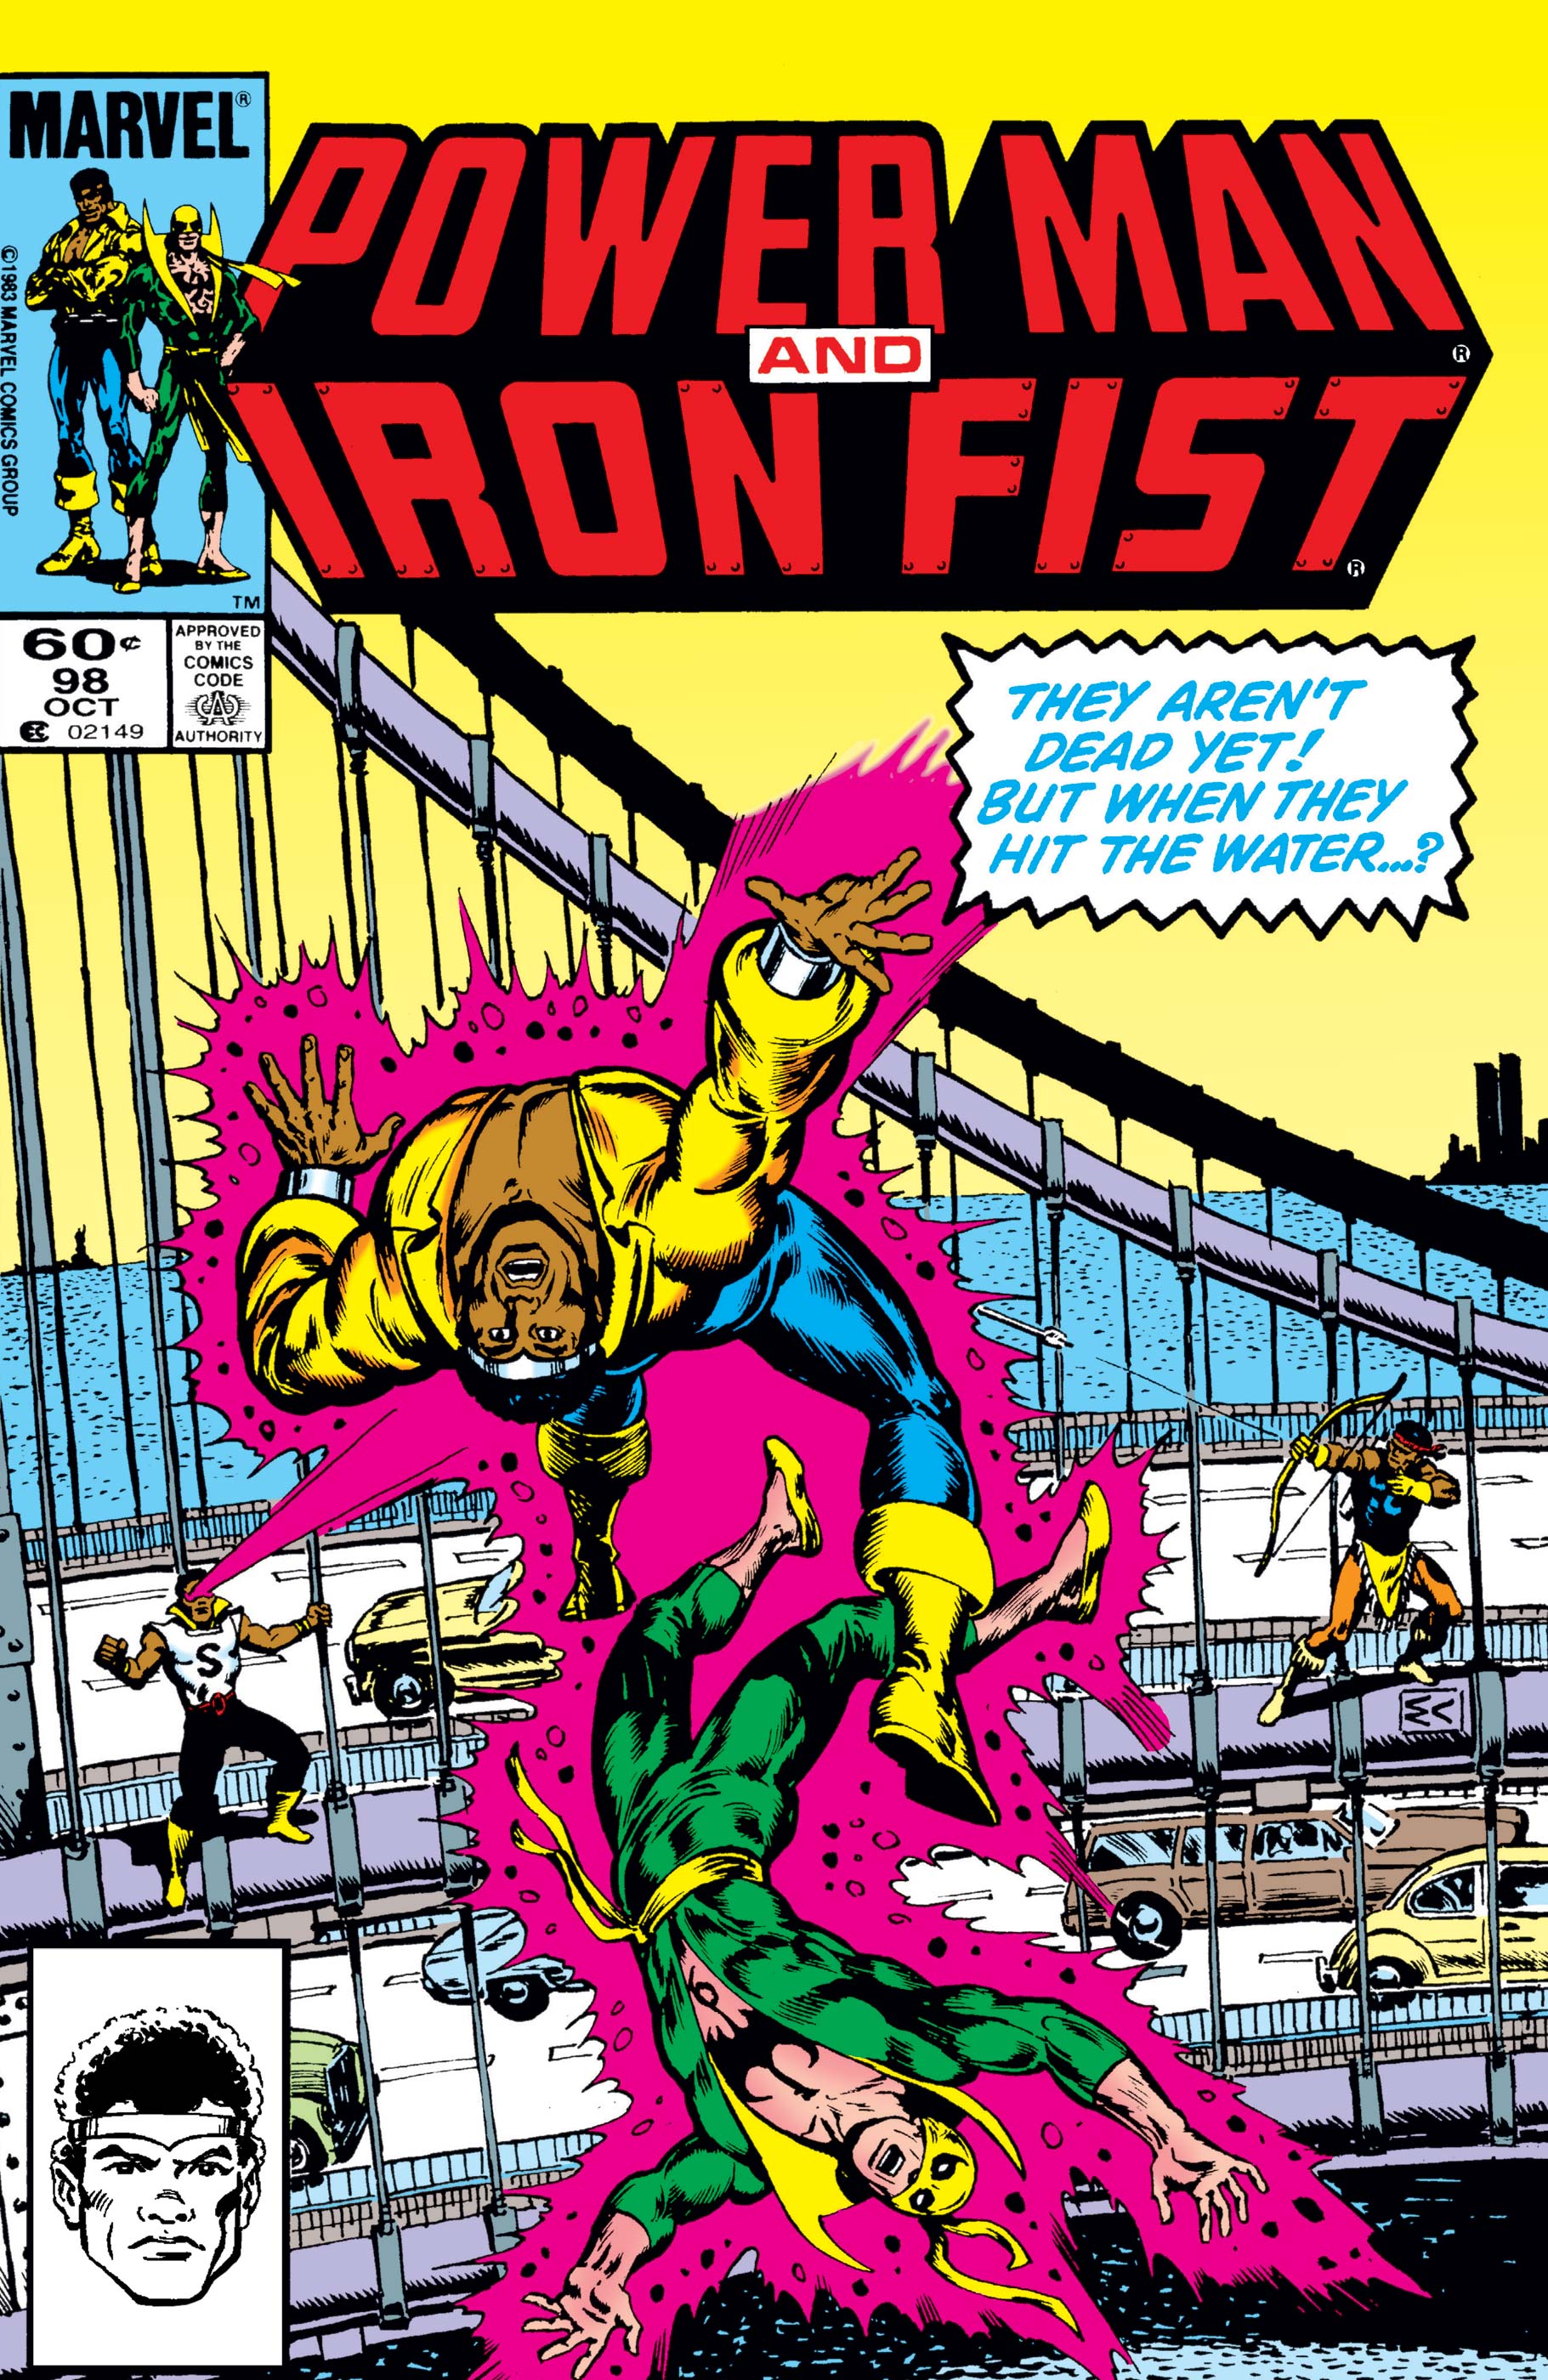 Power Man and Iron Fist (1978) #98